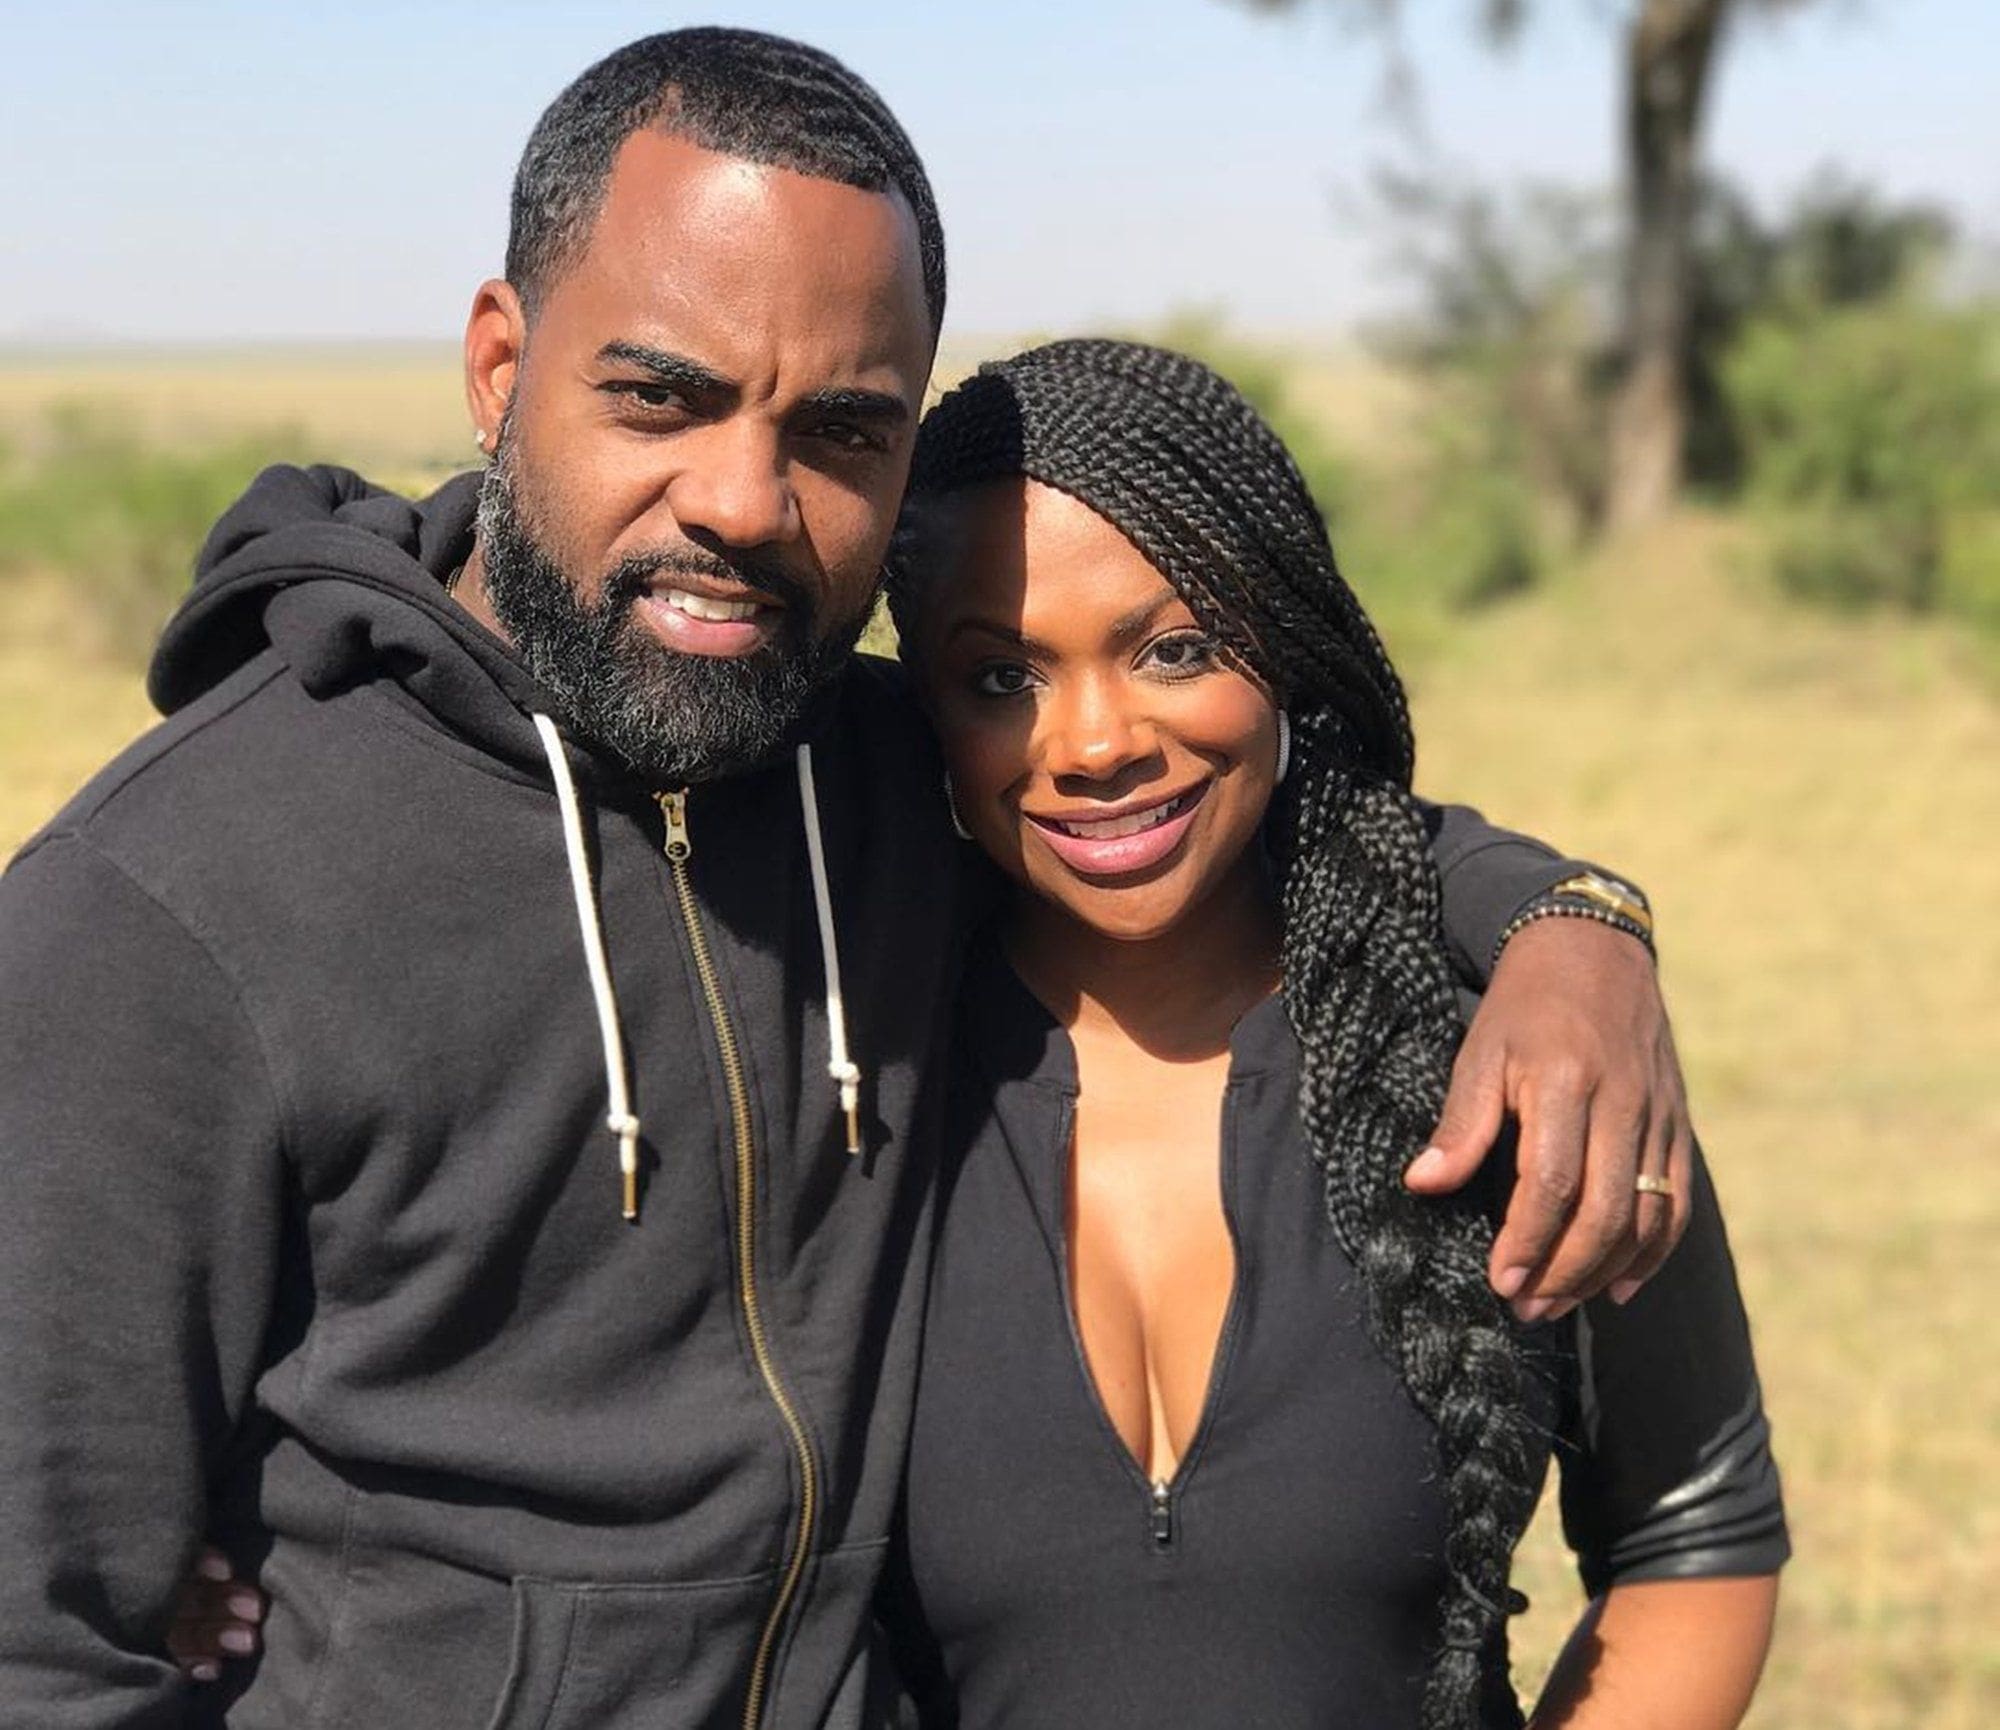 Kandi Burruss' Husband, Todd Tucker Shares A Video On His YouTube Channel For Blaze Tucker's Baby Shower